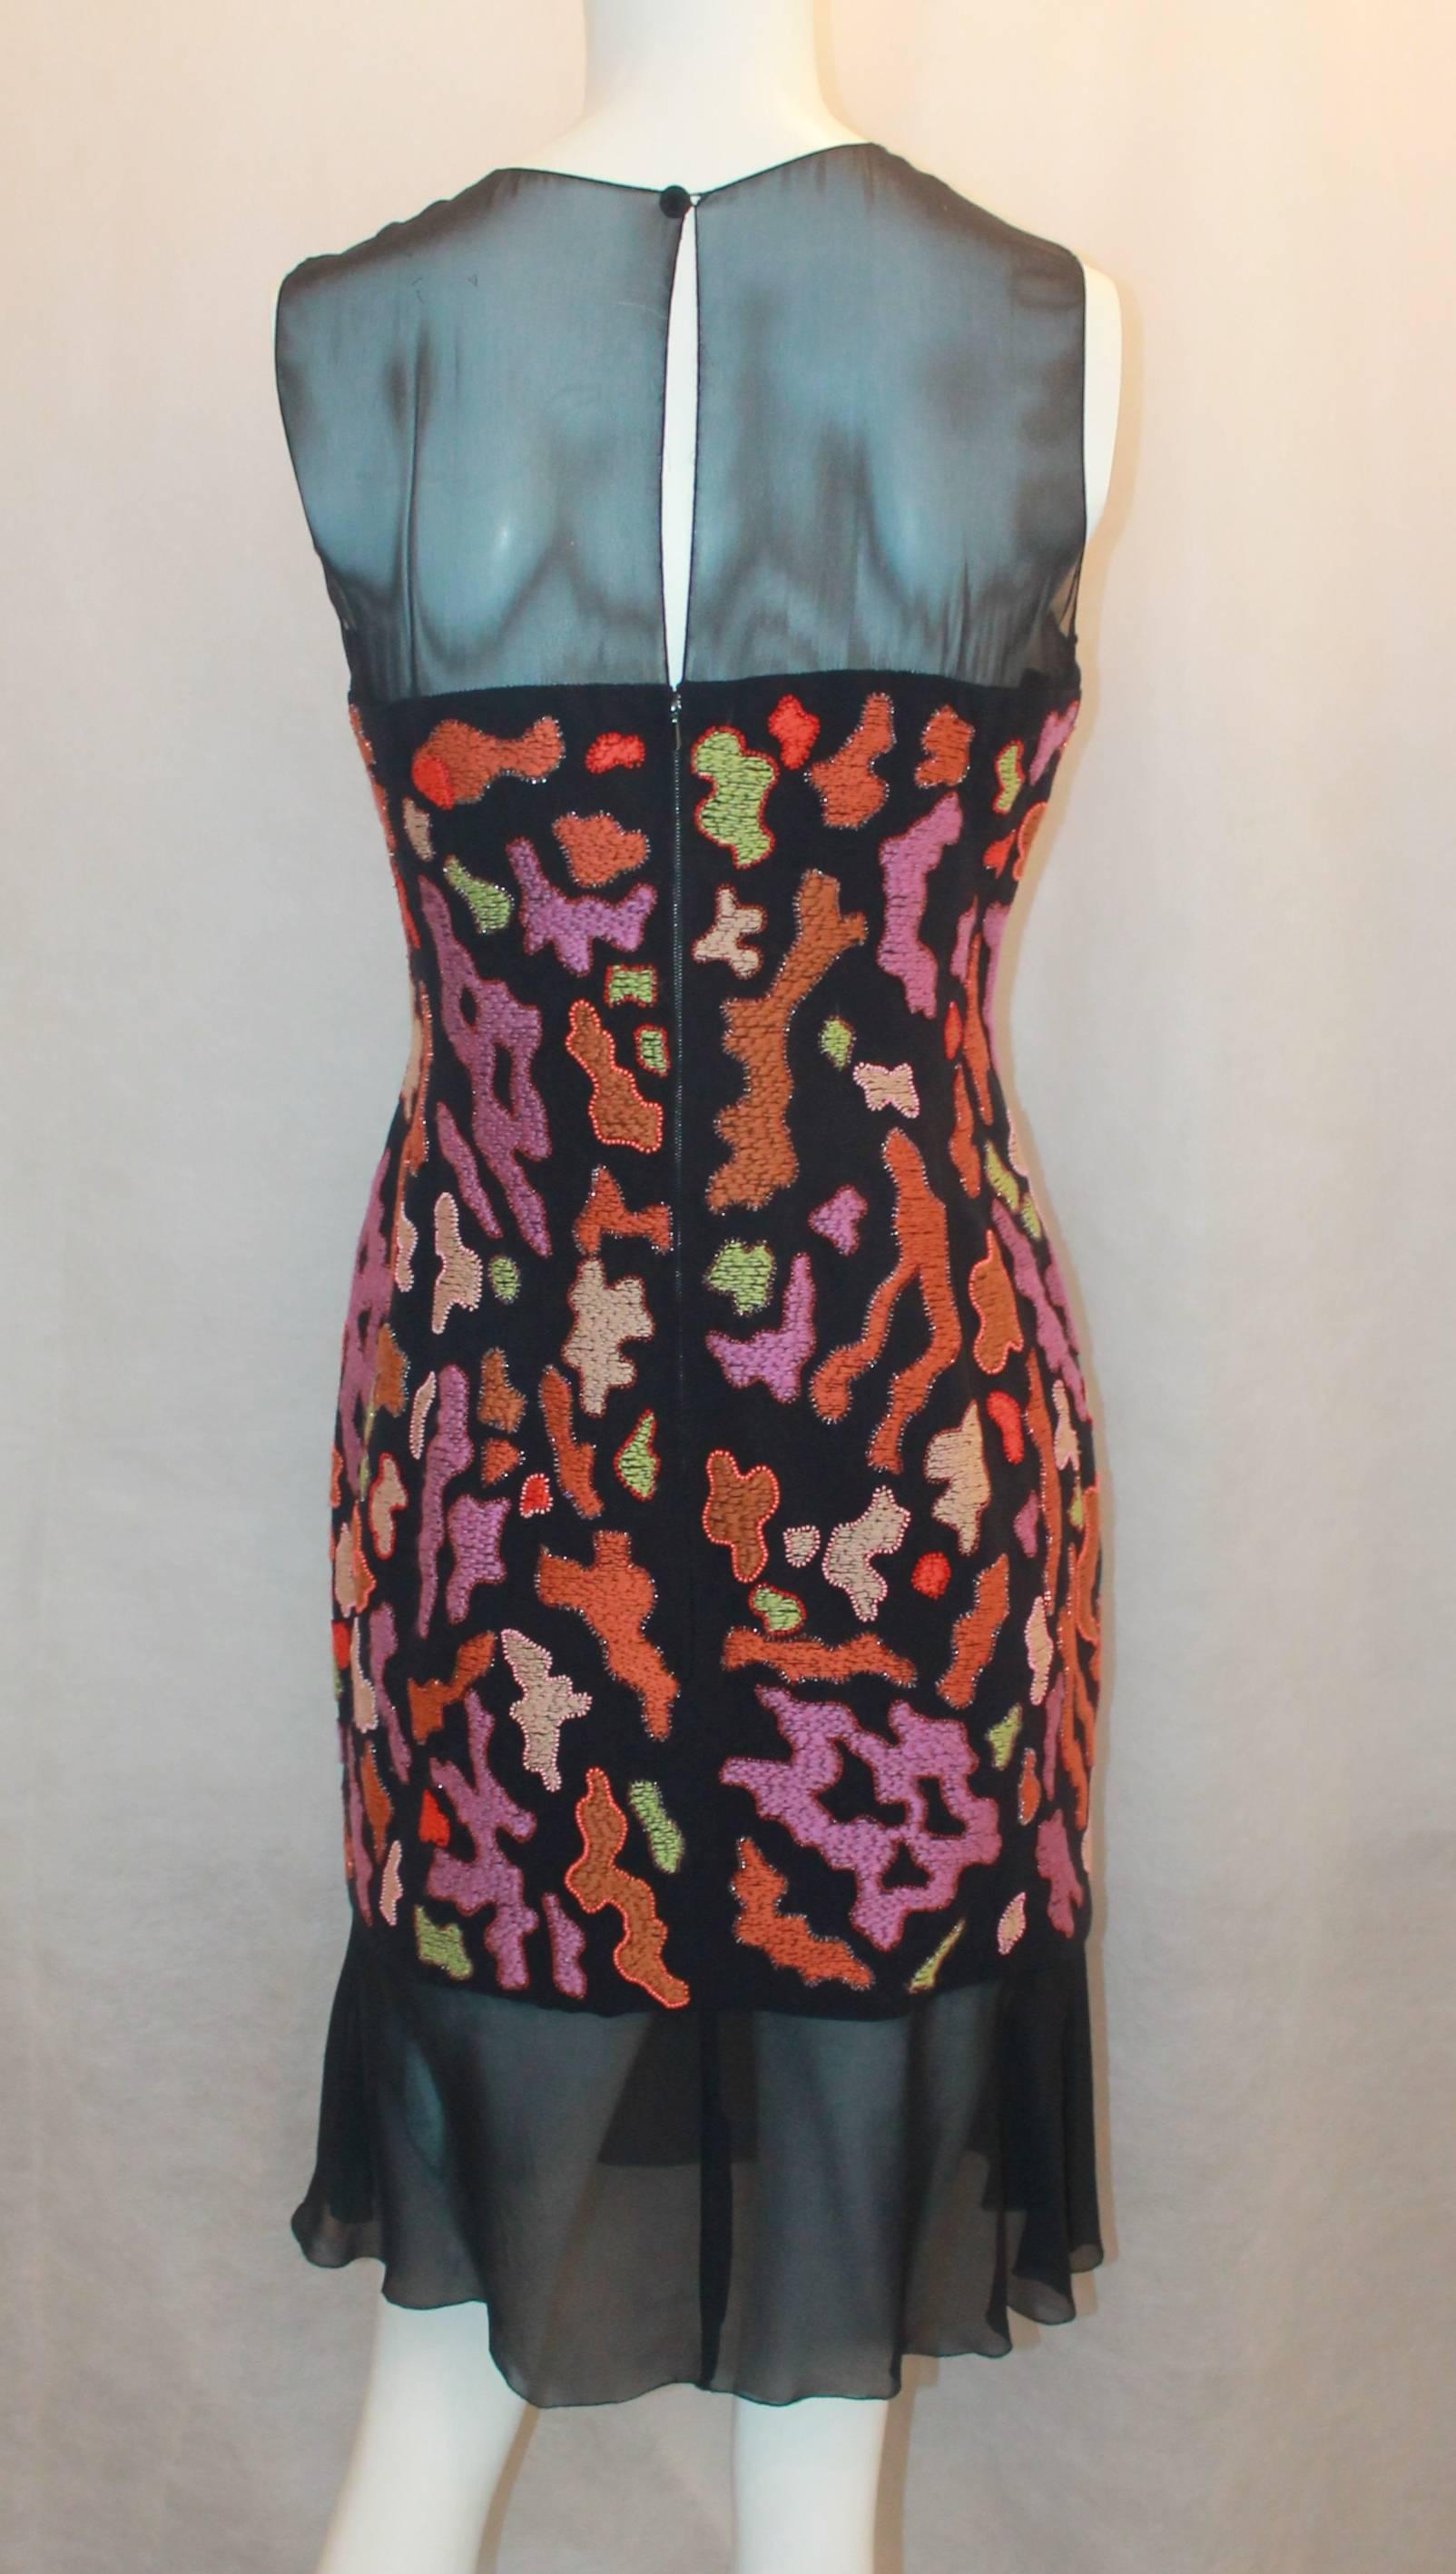 Women's Chanel Navy & Multi-color Embroidered Silk Dress - 40 - 97A